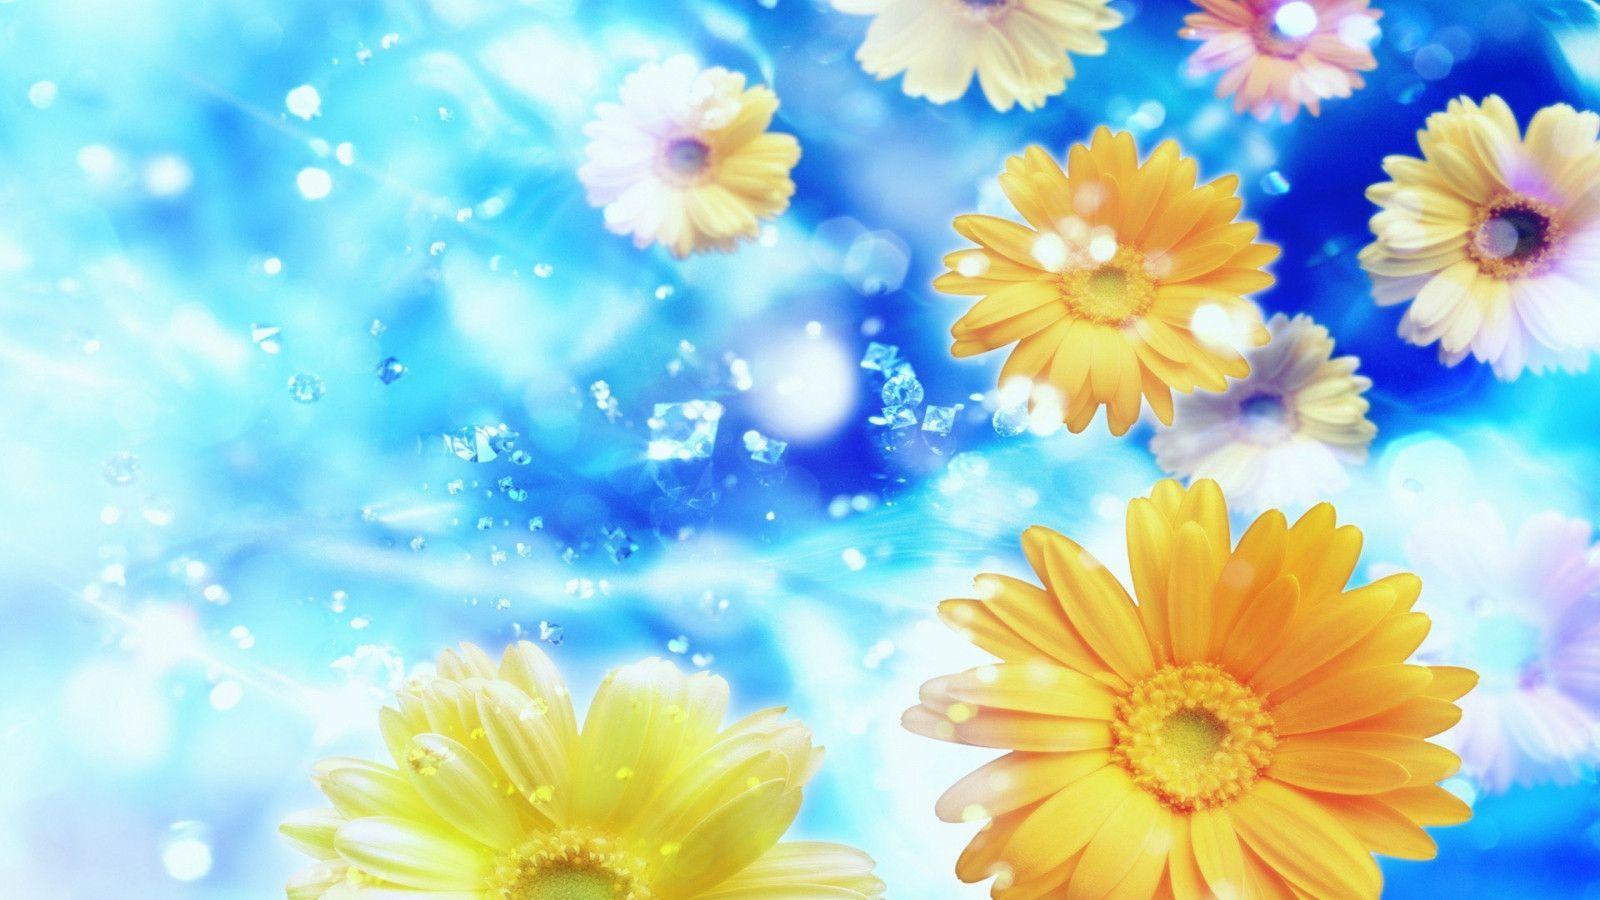 Download 1600x900 Resolution Of High Def Background Flowers